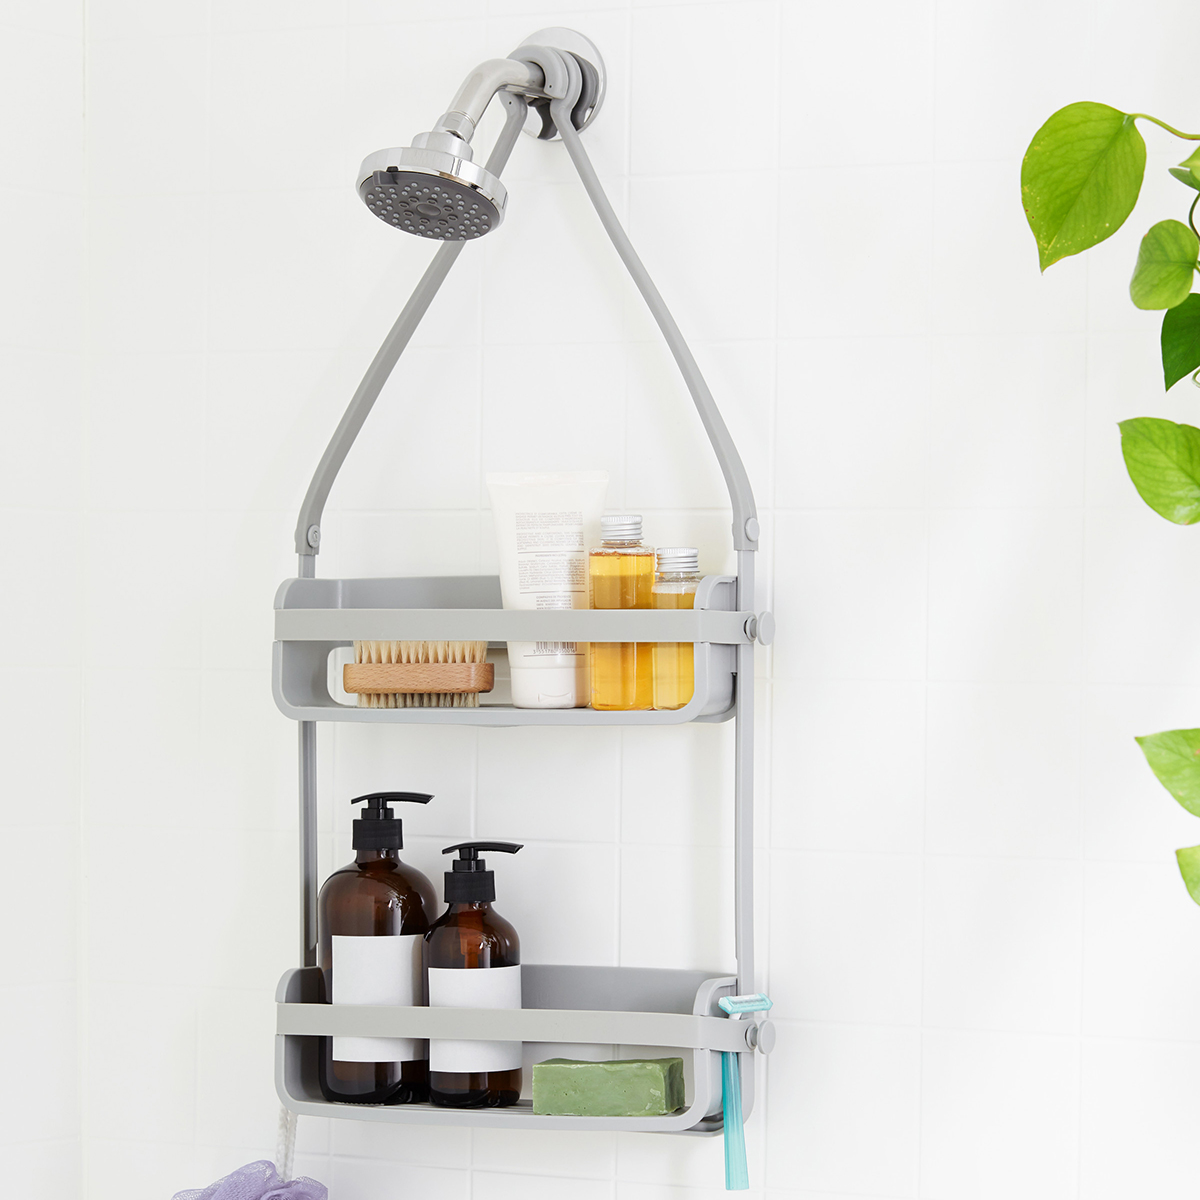 https://www.containerstore.com/catalogimages/405450/10069016-Umbra-Shower-Caddy-VEN6.jpg